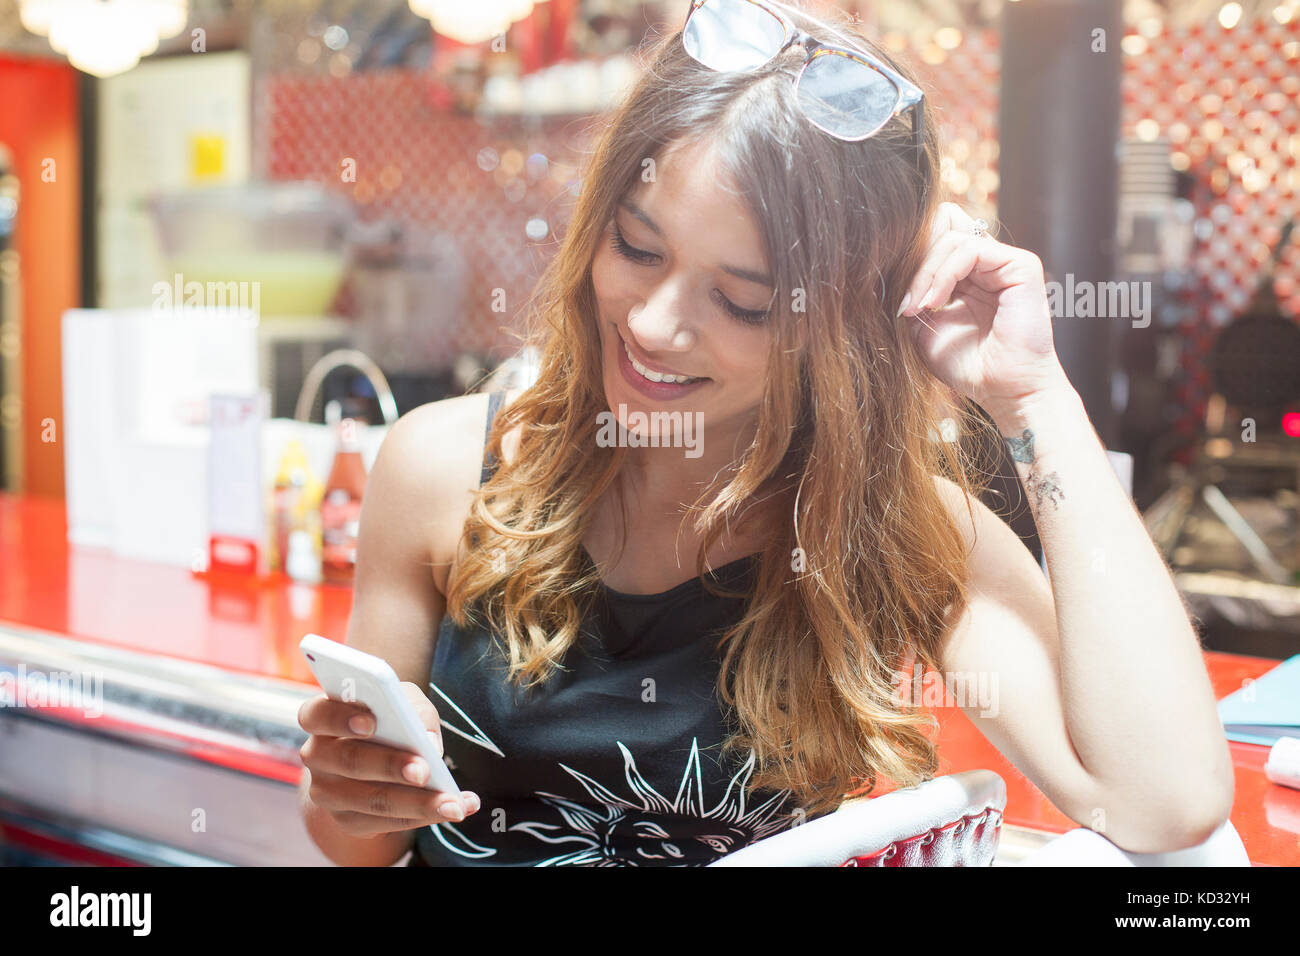 Young woman sitting in cafe, looking at smartphone, smiling Banque D'Images